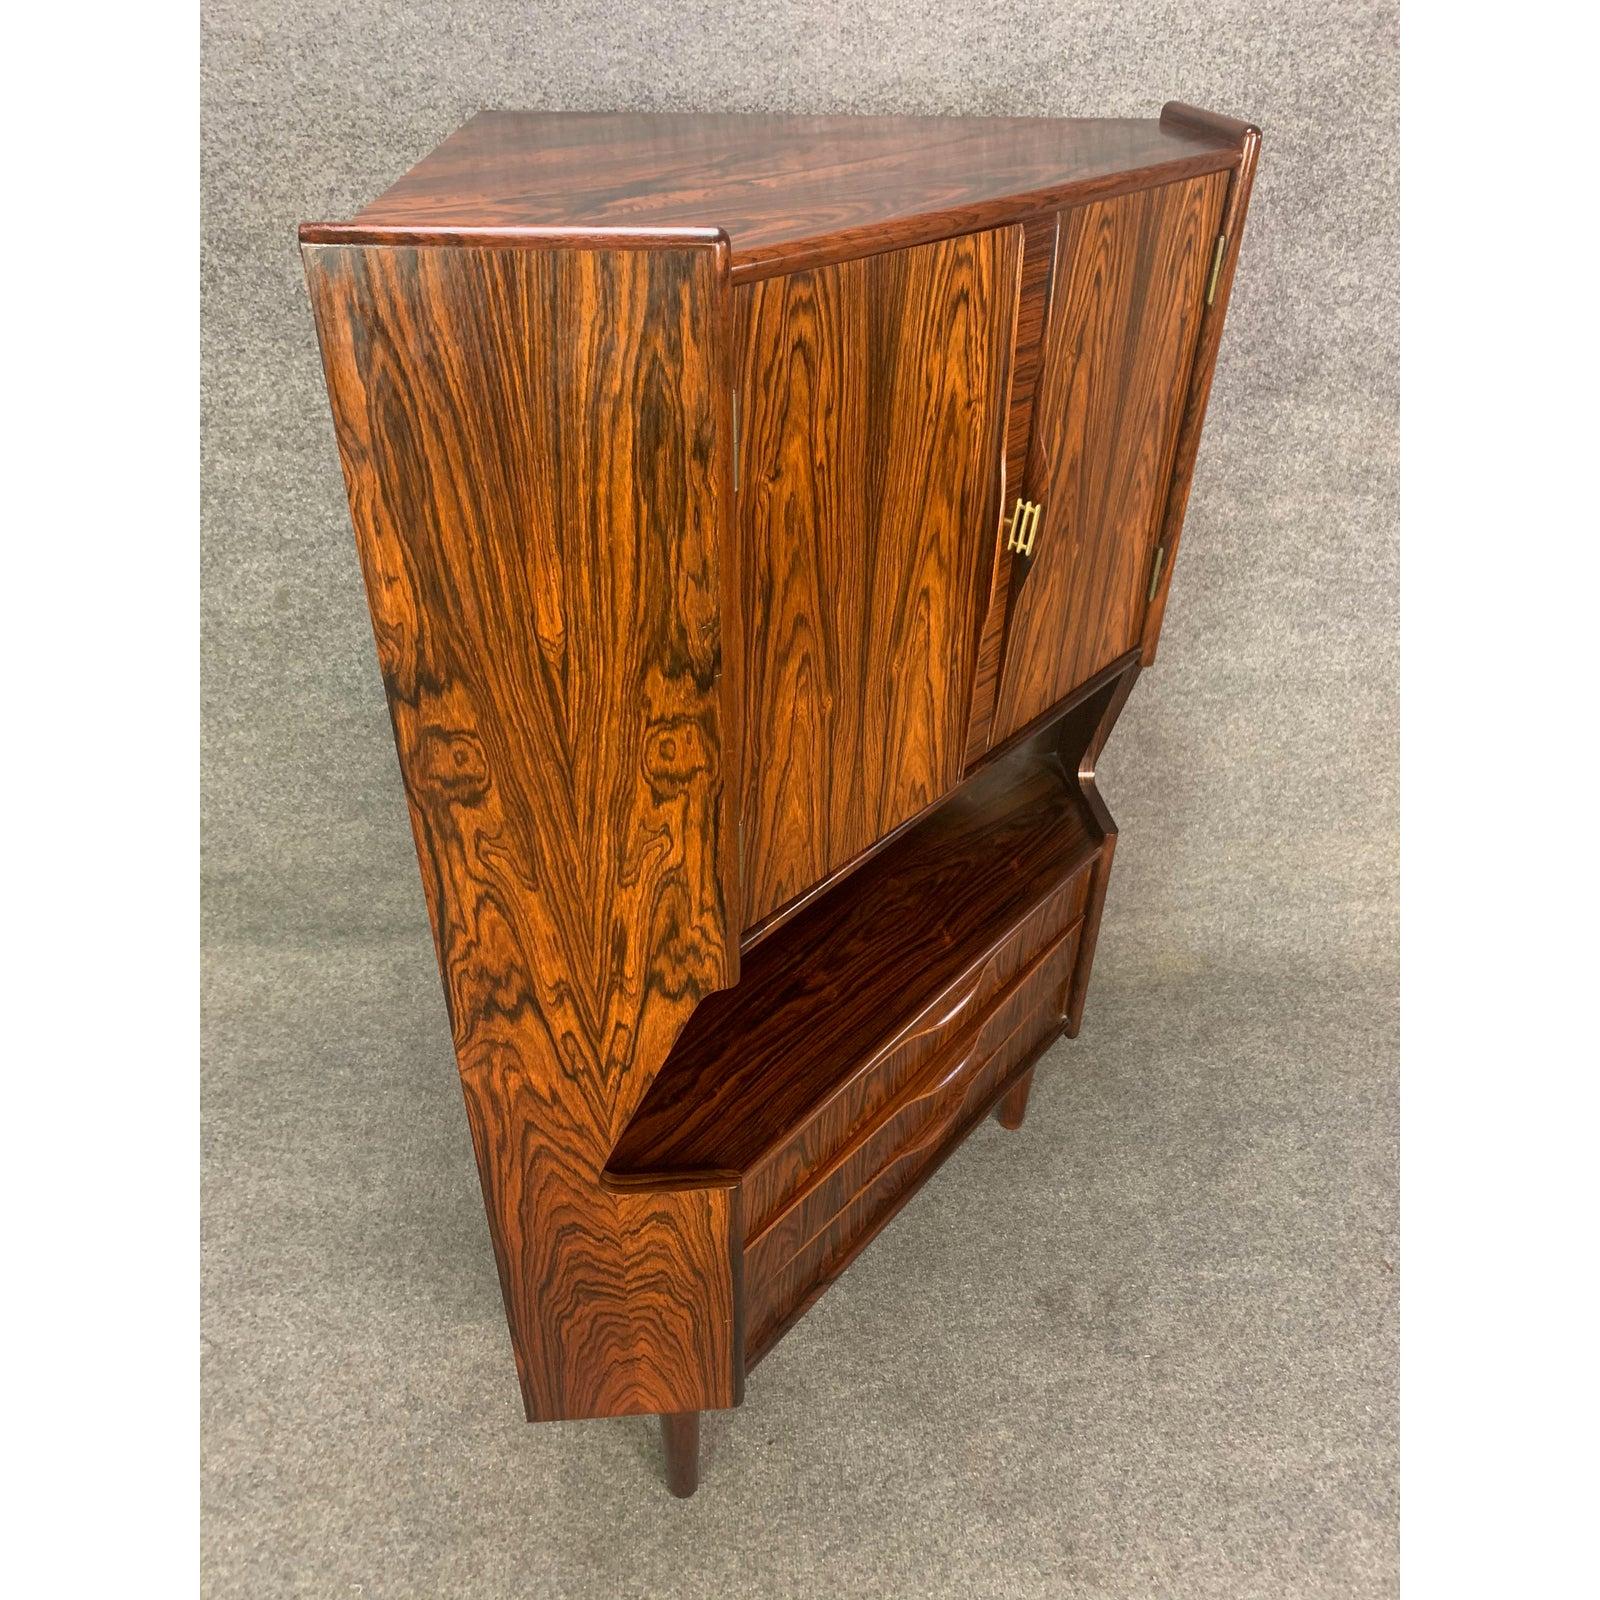 Vintage Danish Mid-Century Modern Rosewood Bar Corner Cabinet In Good Condition For Sale In San Marcos, CA